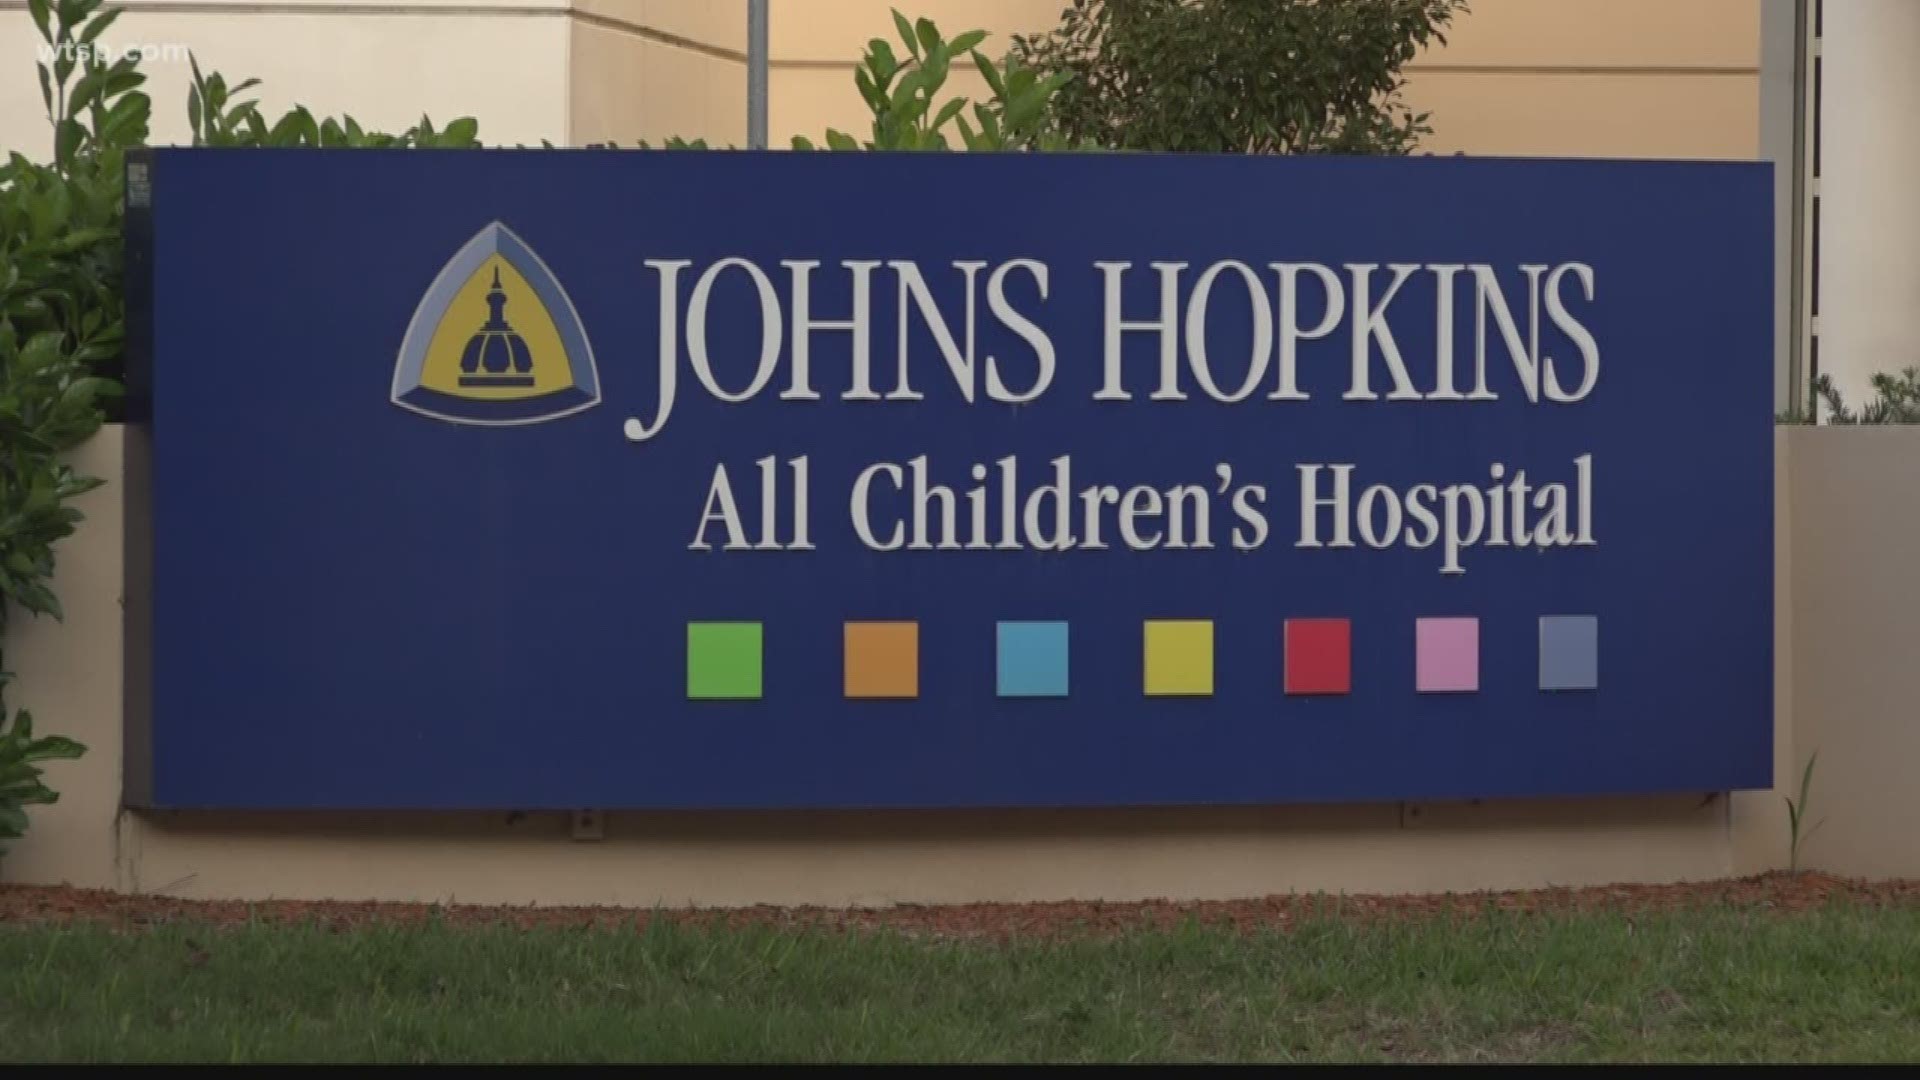 Johns Hopkins All Children's Hospital has submitted a corrective action plan after it parted ways with numerous high-profile staff members in the wake of a Tampa Bay Times investigation that exposed problems in the facility's heart surgery program.